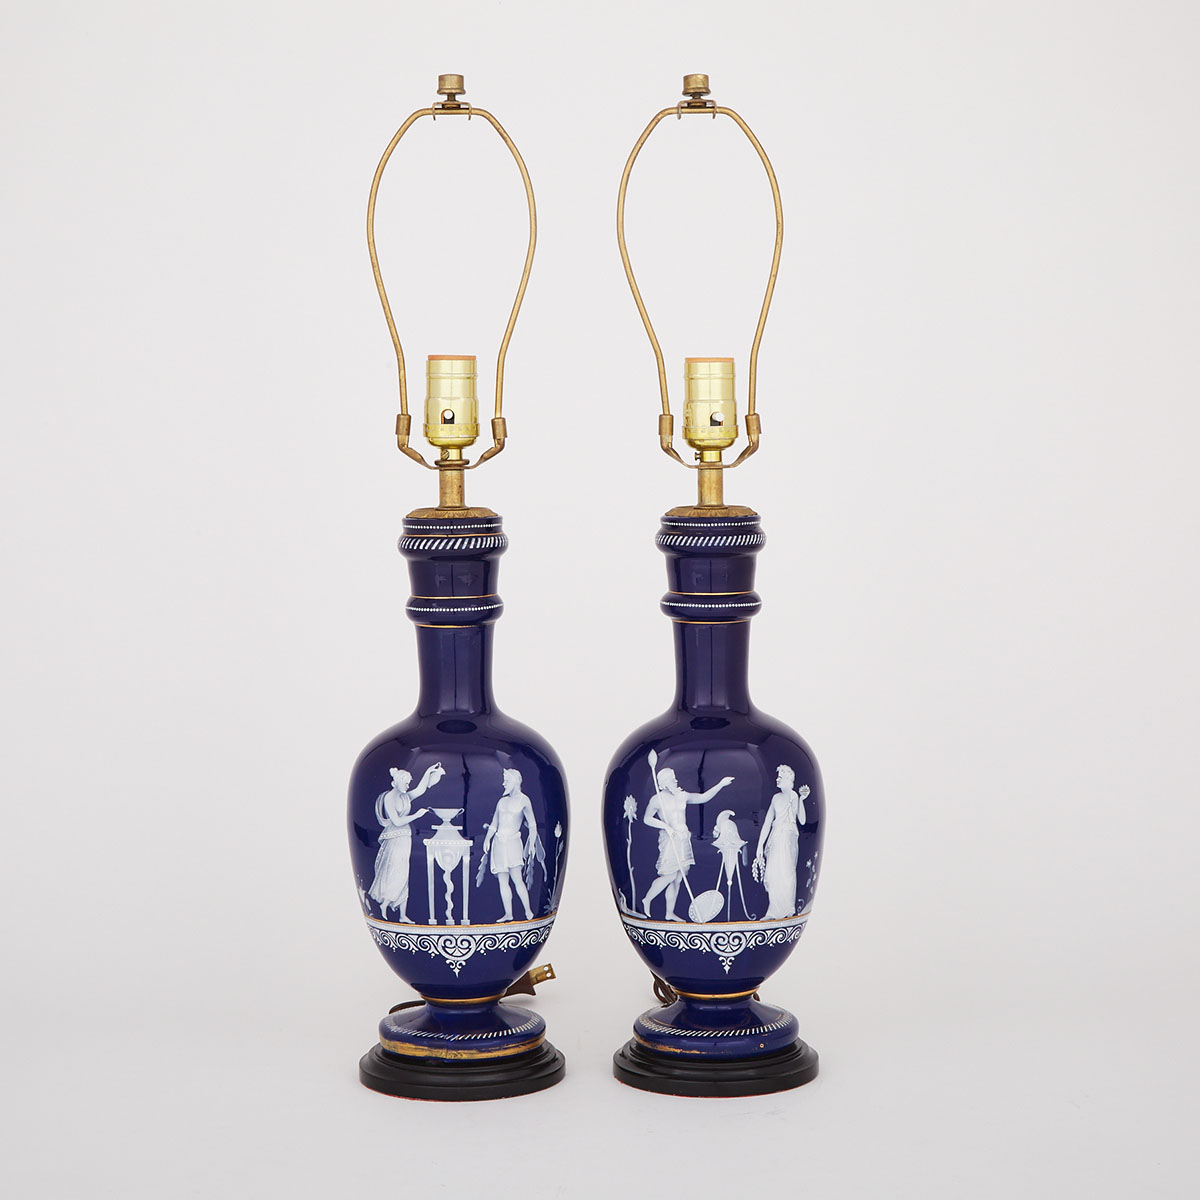 Pair of Pate-sur-Pate Porcelain Vase Table Lamps, early 20th century